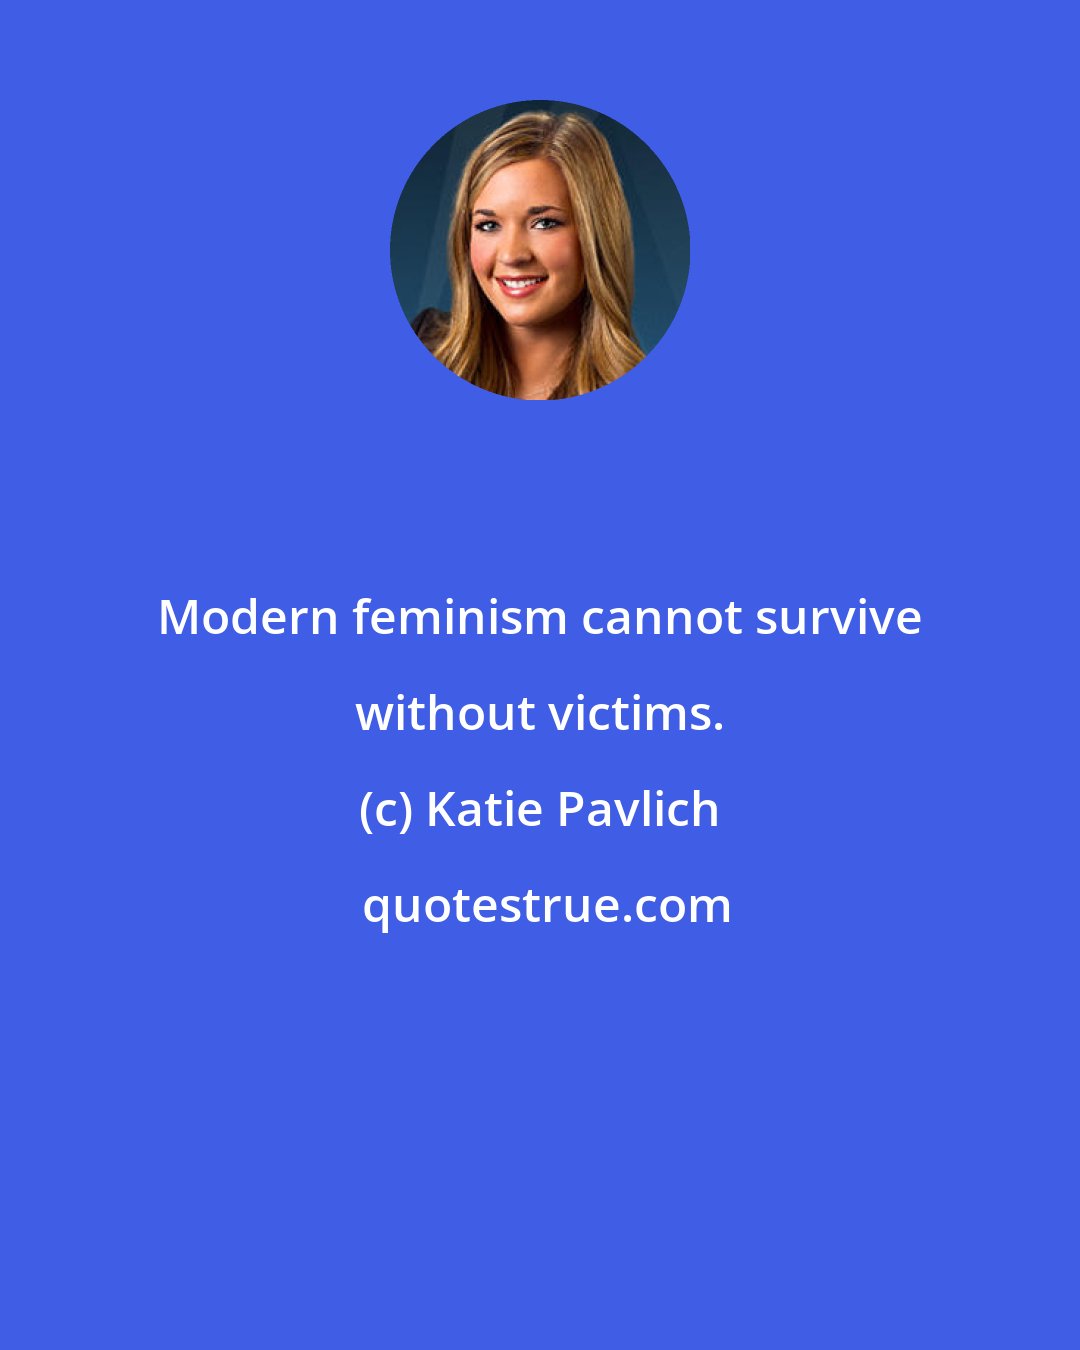 Katie Pavlich: Modern feminism cannot survive without victims.